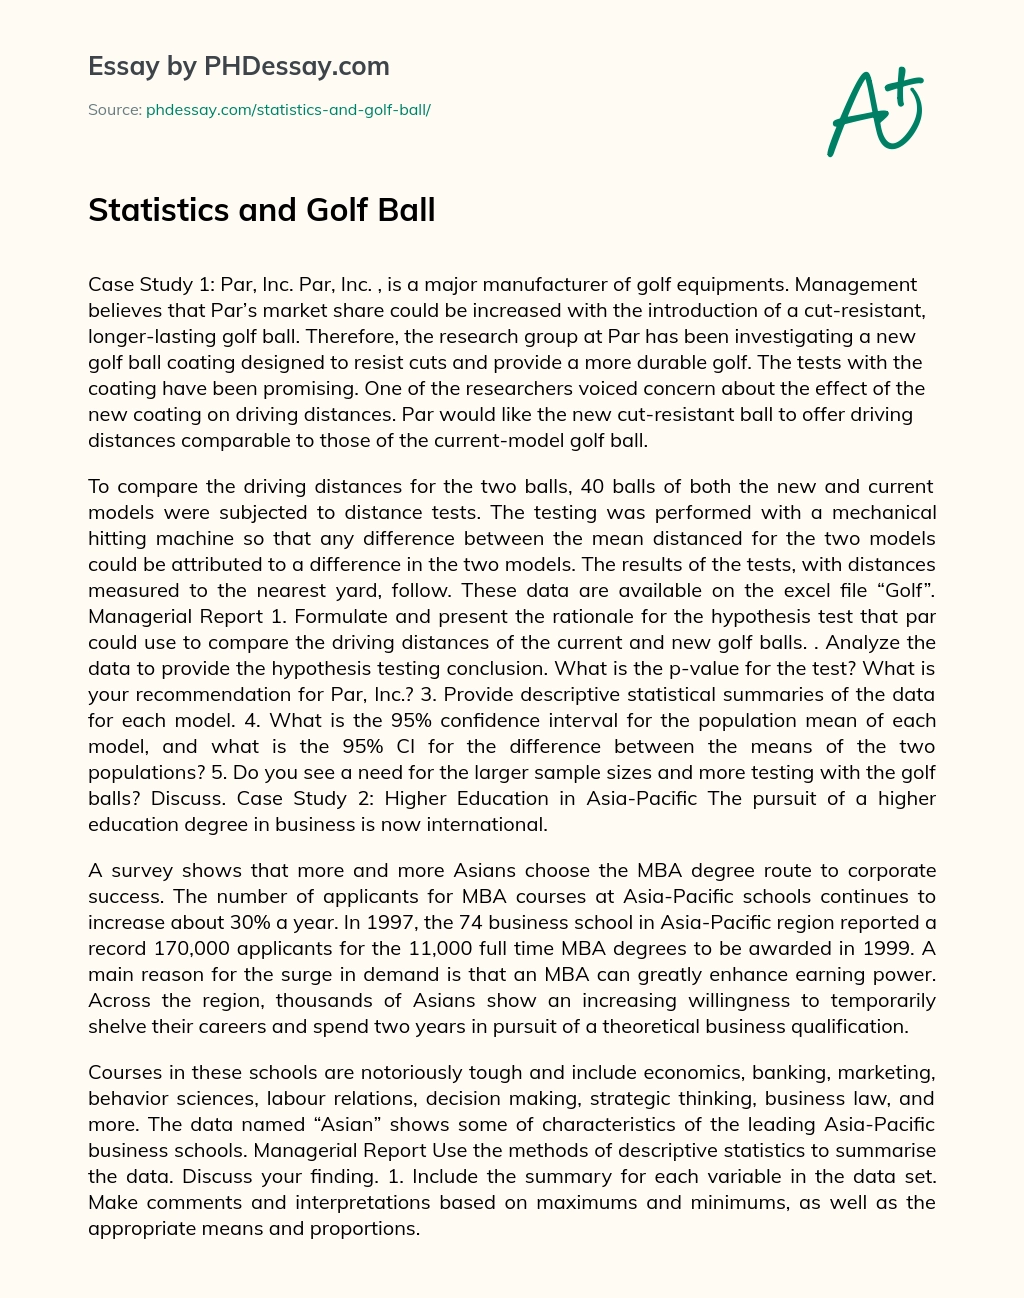 essay about golf